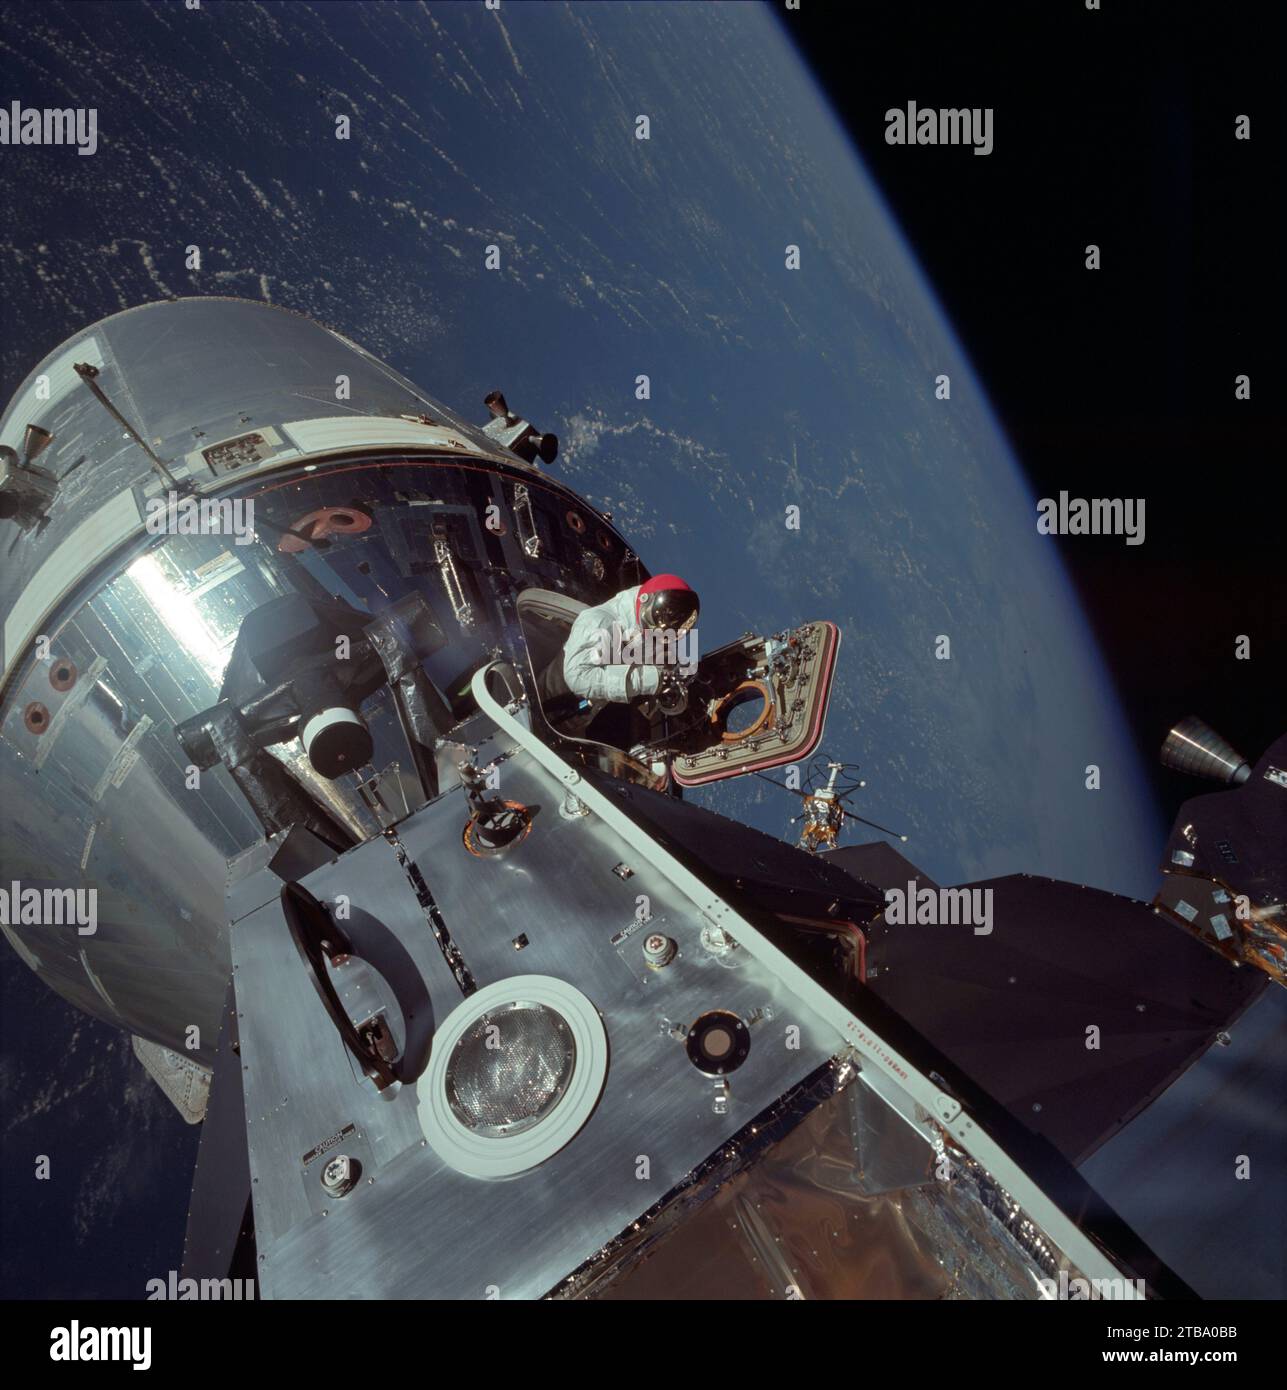 Apollo 9 Command and Service Modules and Lunar Module with Earth in background, 1969. Stock Photo